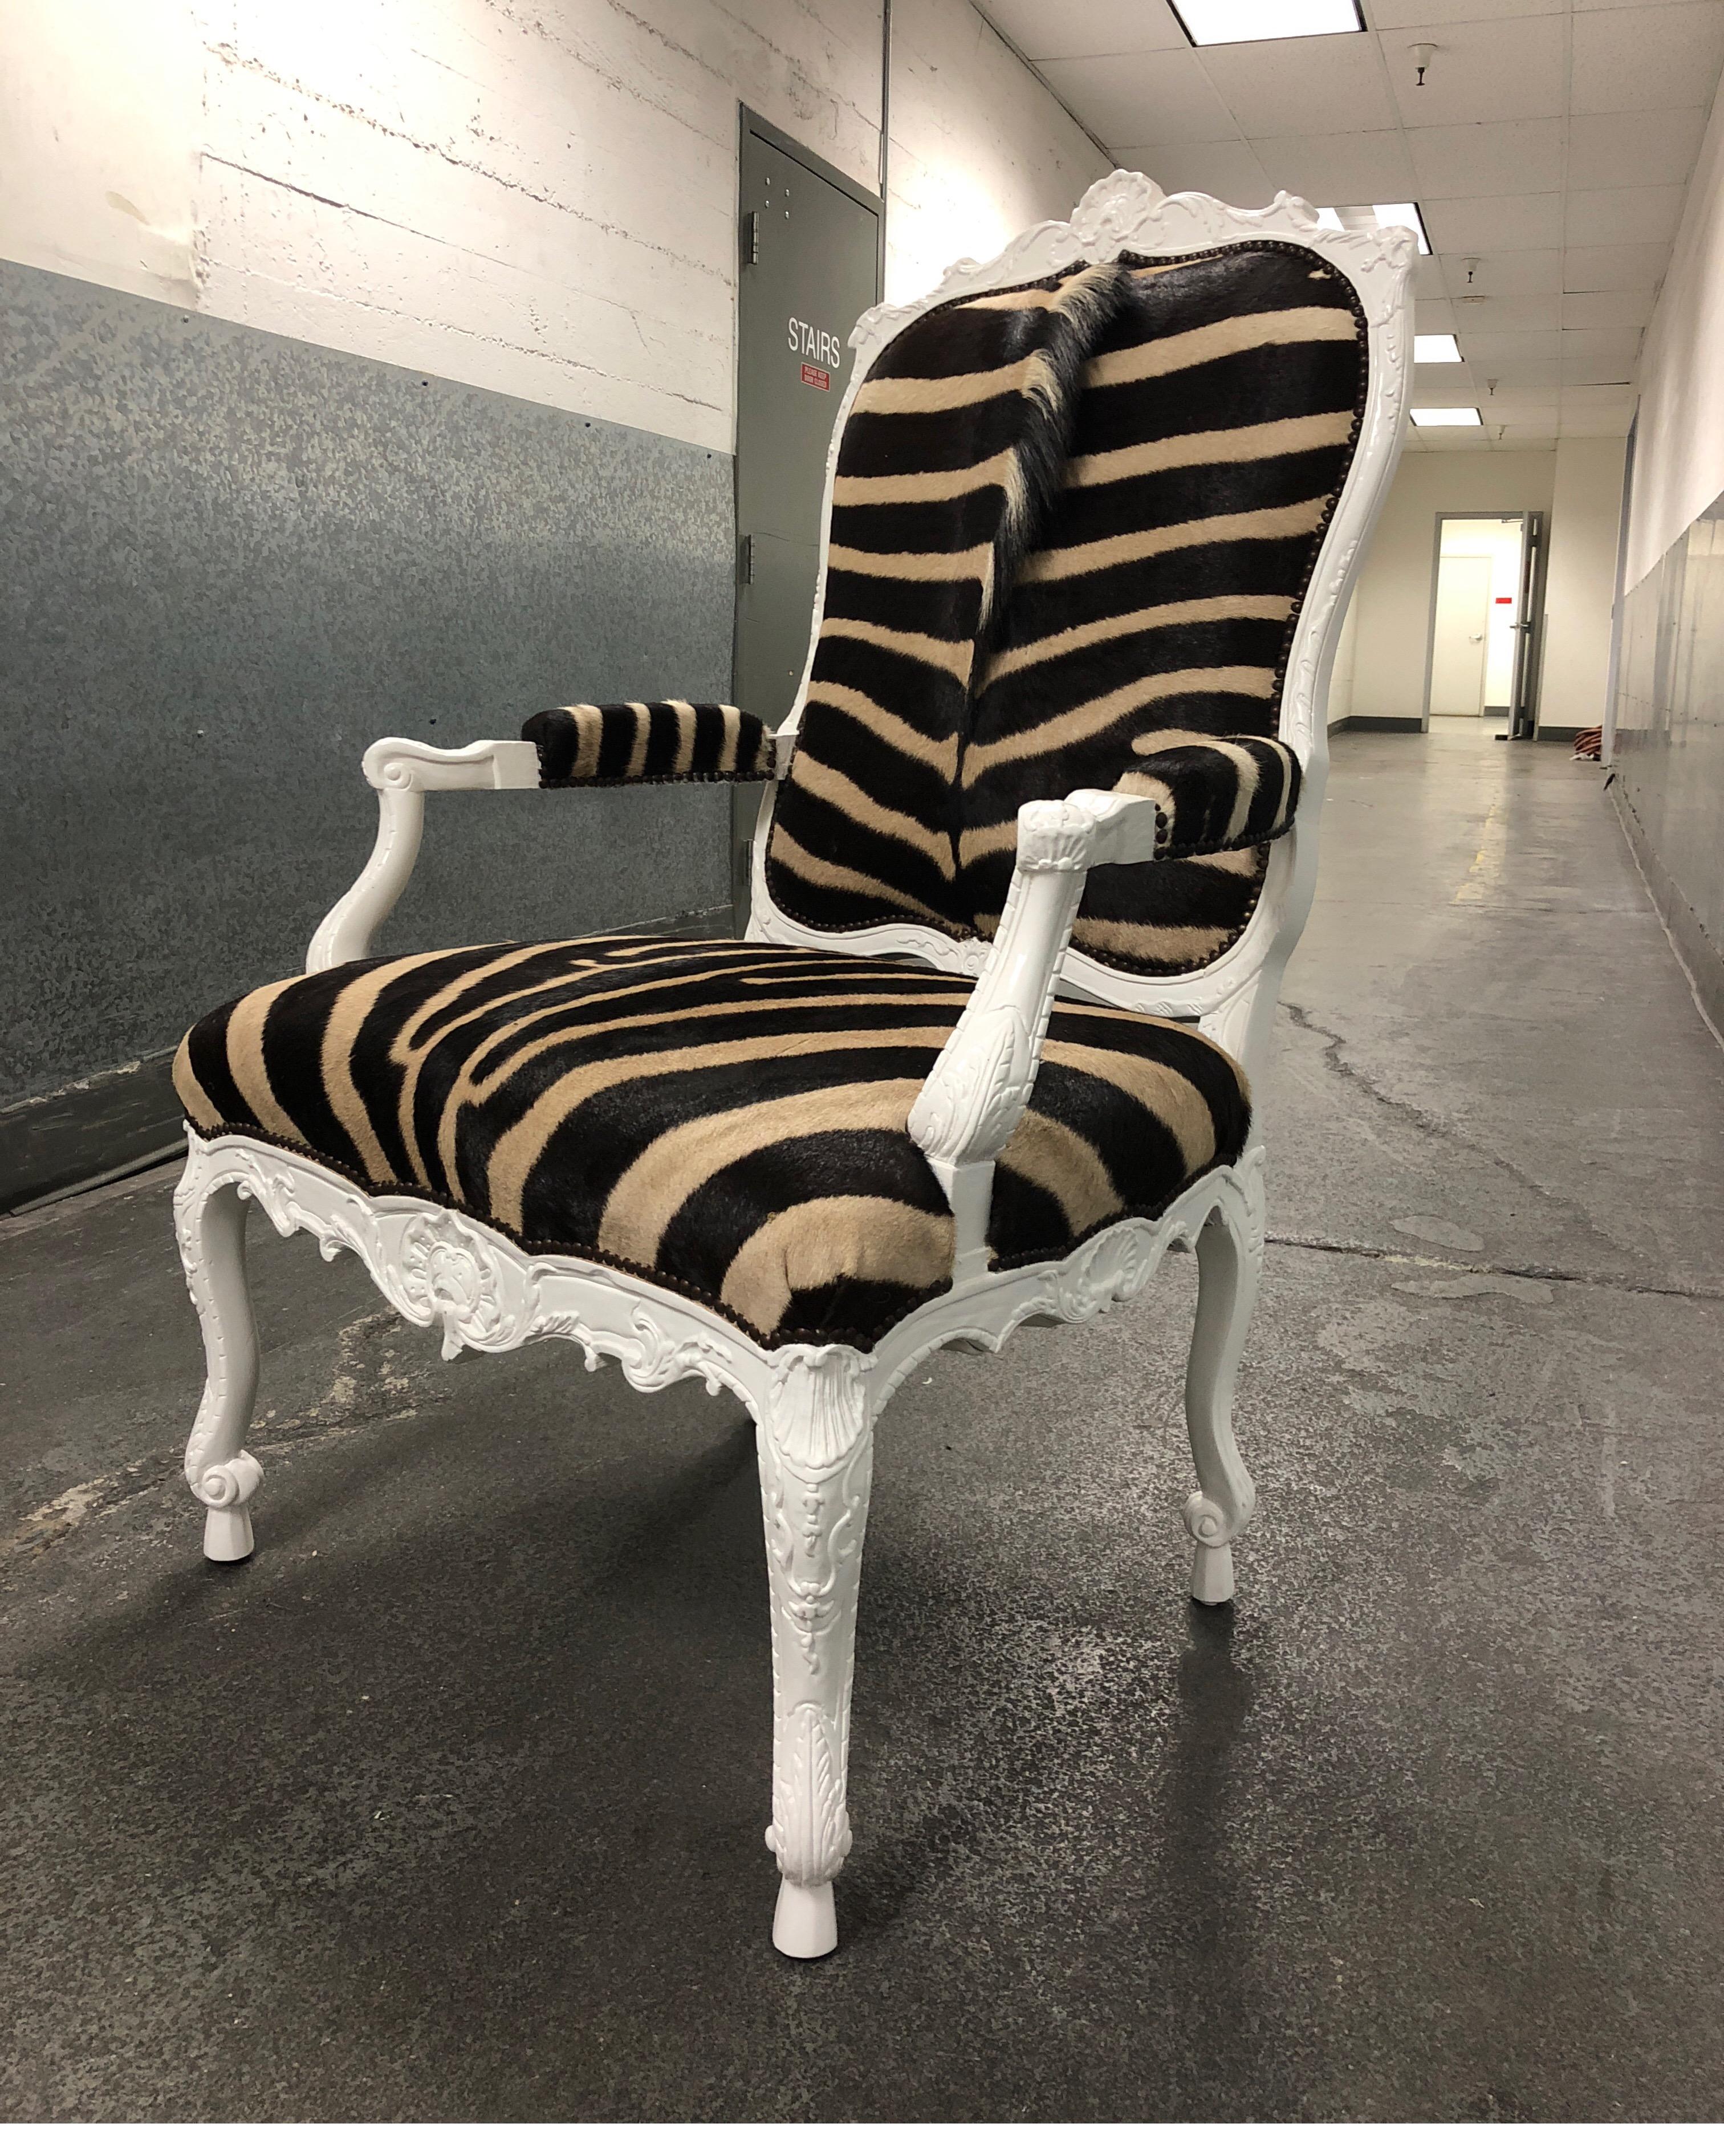 A Jesi armchair by Ebanista. A hand-carved armchair with a white lacquer finish. Antiqued bronze finish nail head trim along seat and back. Upholstered in a South African hide. Measures: Arm height: 27.5 inches, seat height: 20 inches.
     